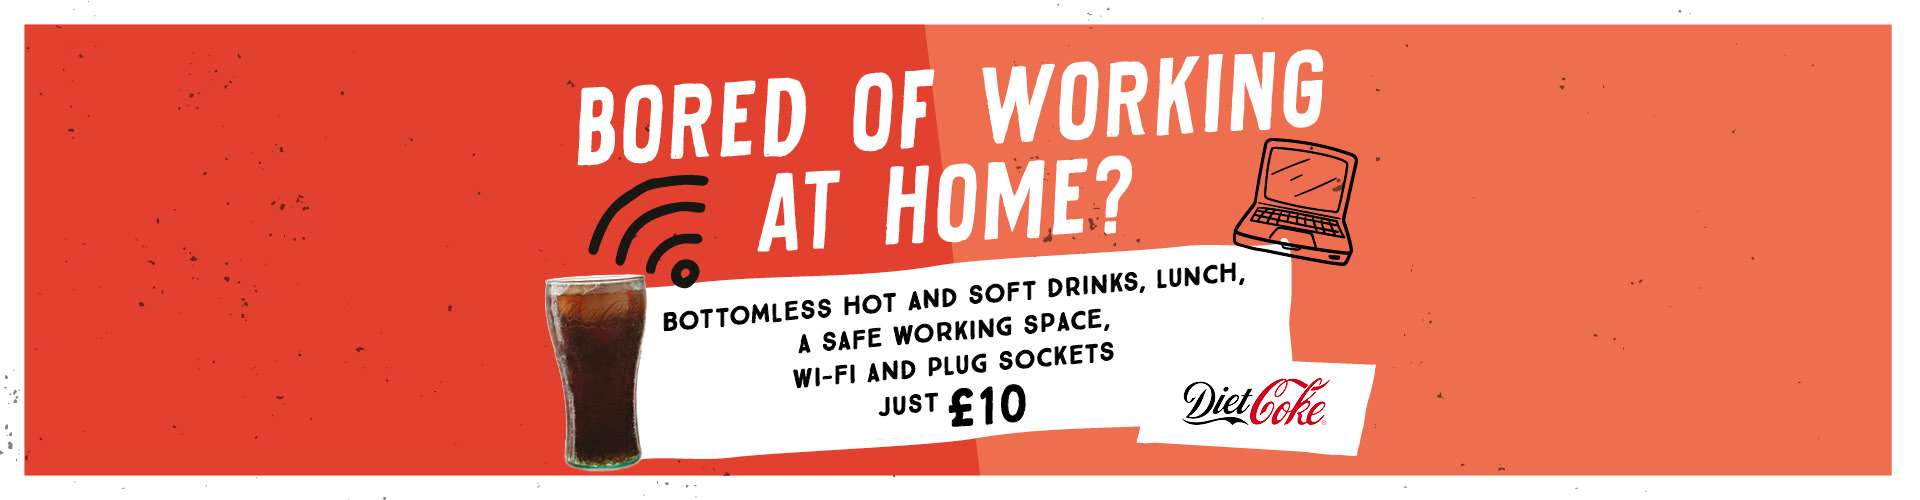 Bored of working at home? Bottomless drinks, lunch, a safe working space, Wi-Fi, sockets - £10